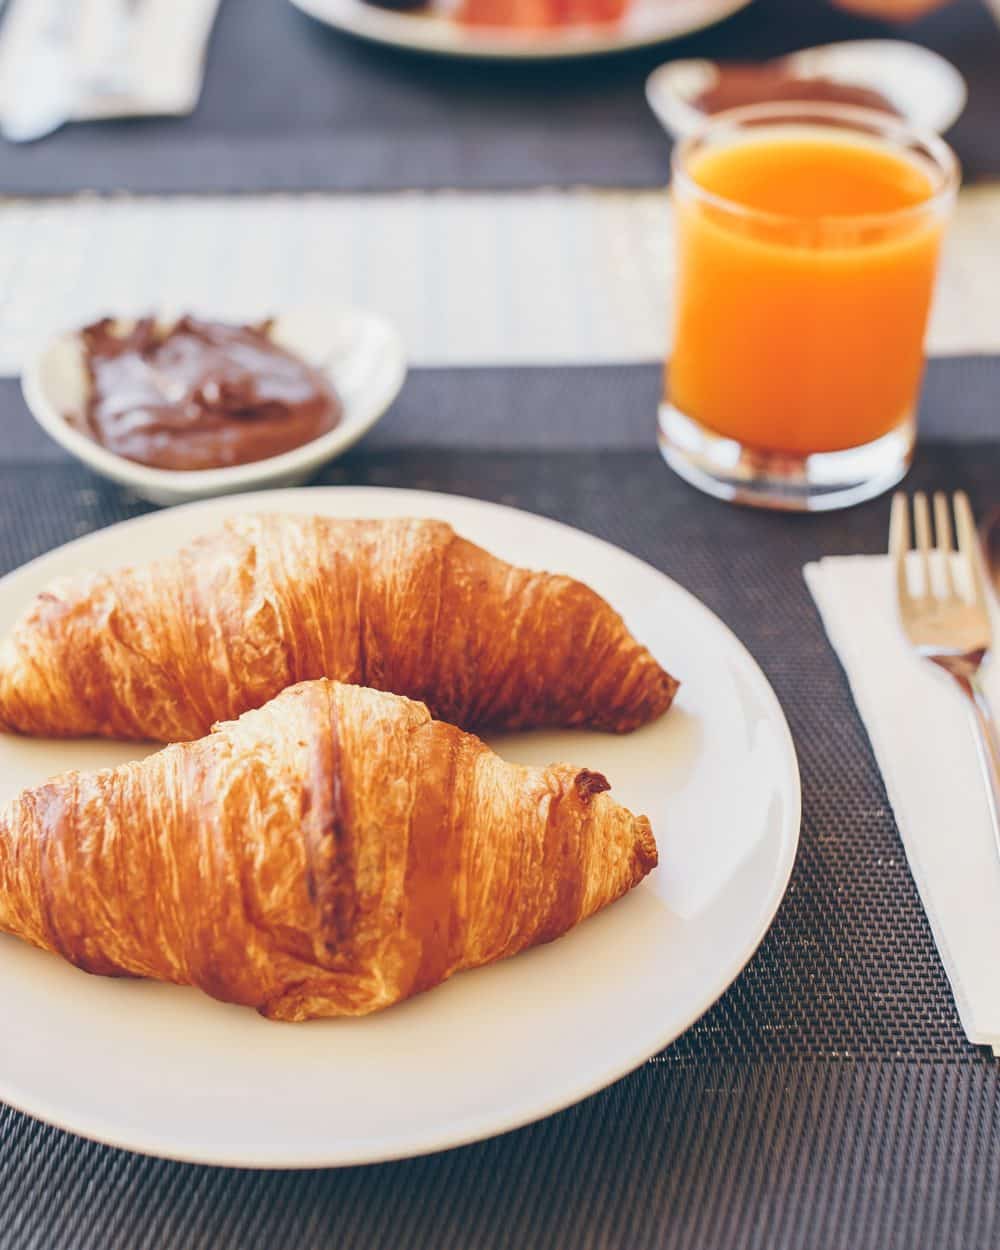 Fresh and delicious breakfast in hotel restaurant F&B forecasting